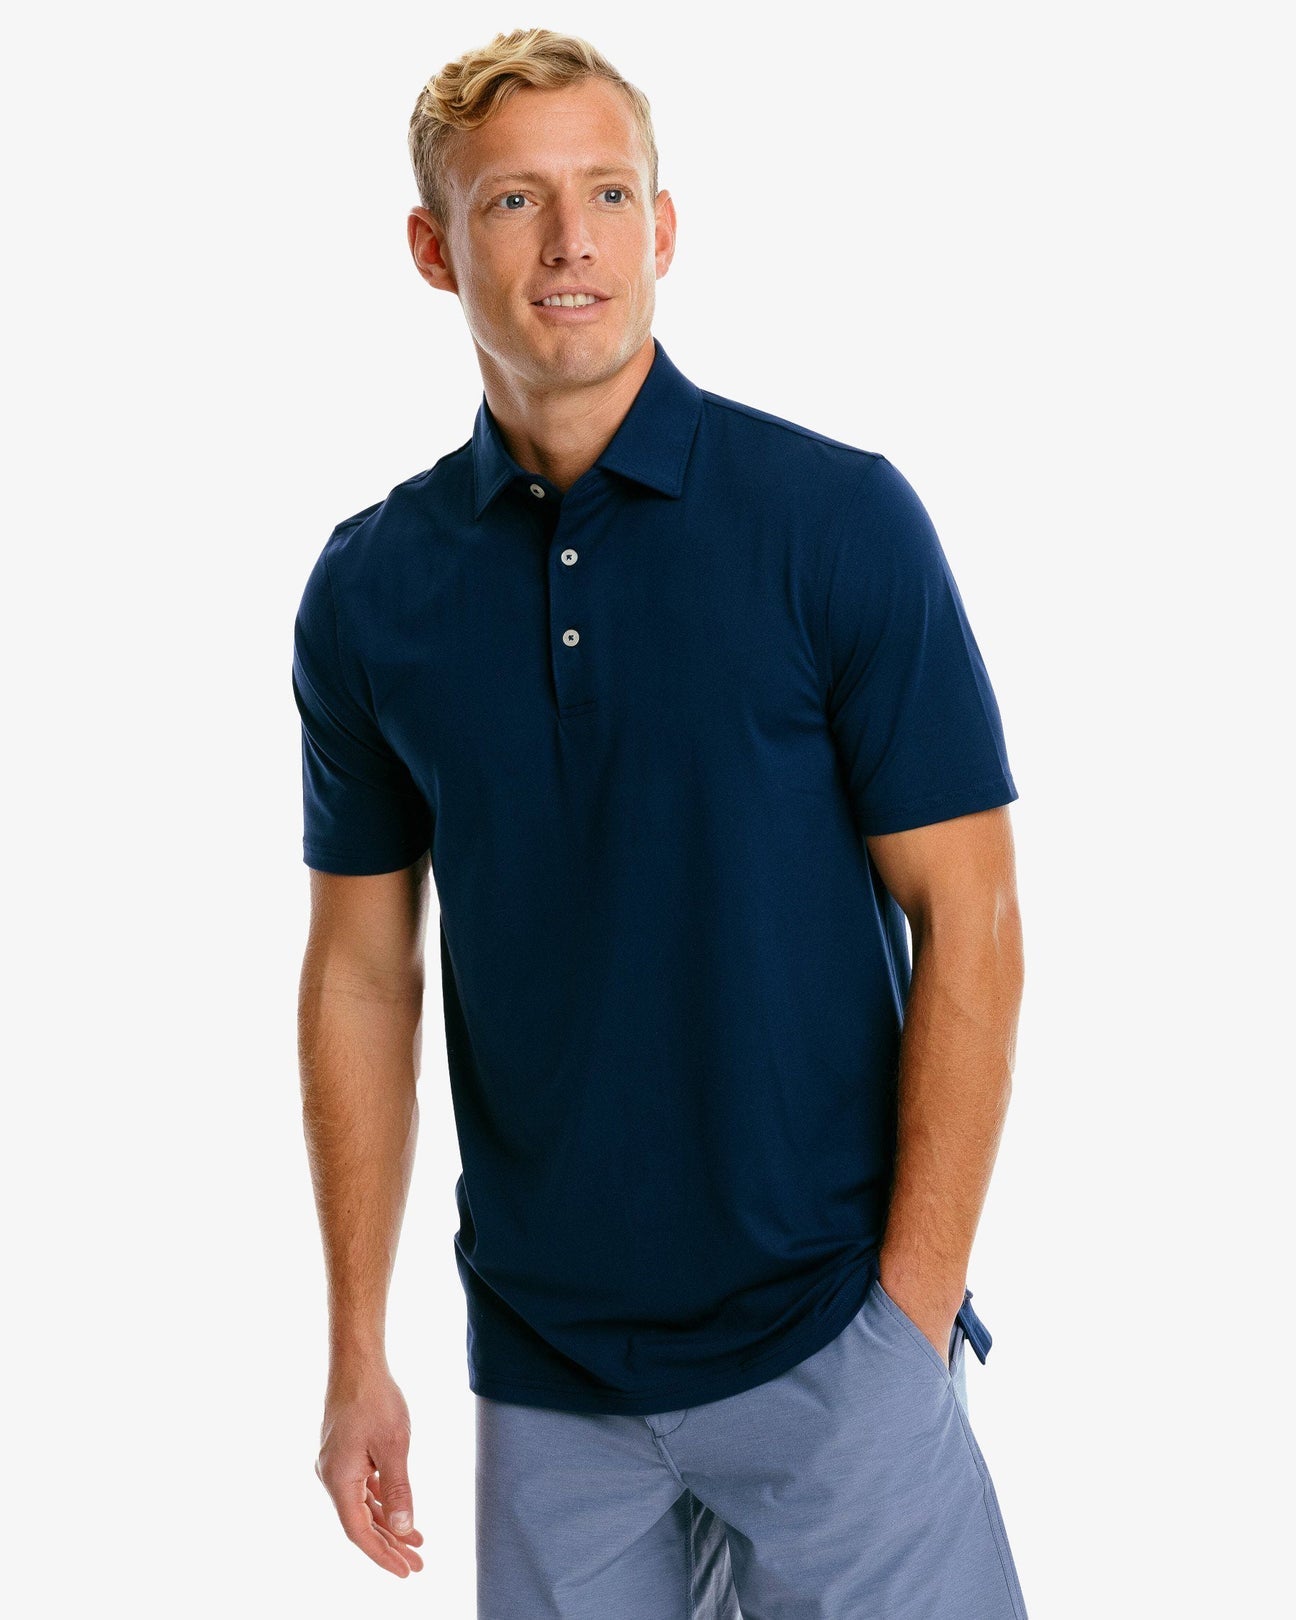 Southern Tide - Men's Ryder Performance Polo Shirt - Color Navy - Model Front View